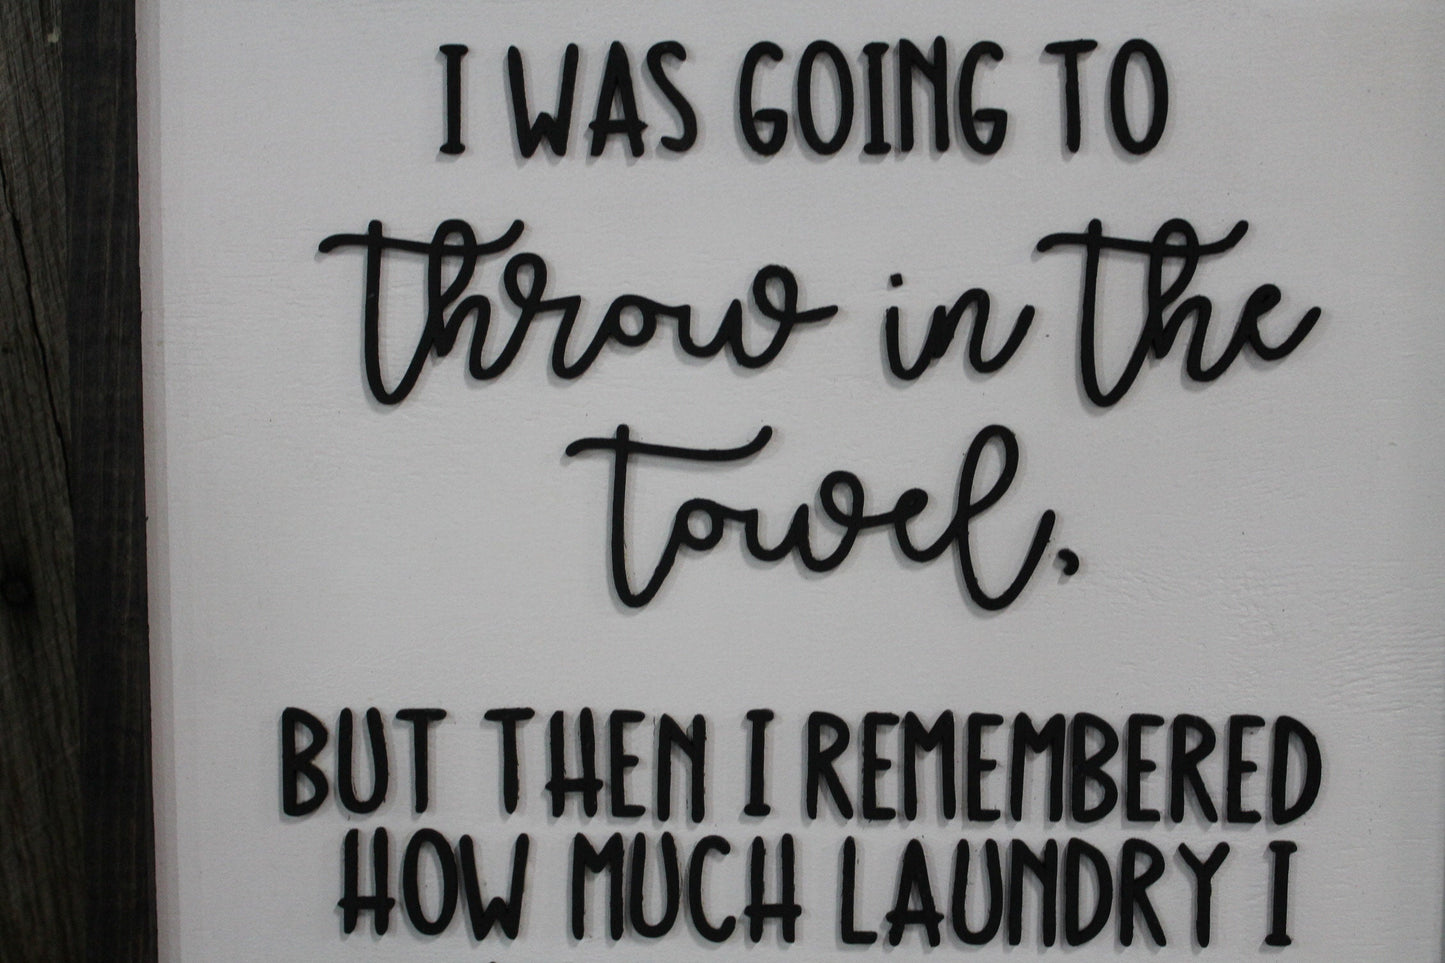 Laundry Room Funny Sign Throw in the Towel Humor Funny Too Much Laundry Cleaning House Work Wood Primitive Wall Decor Raised Text